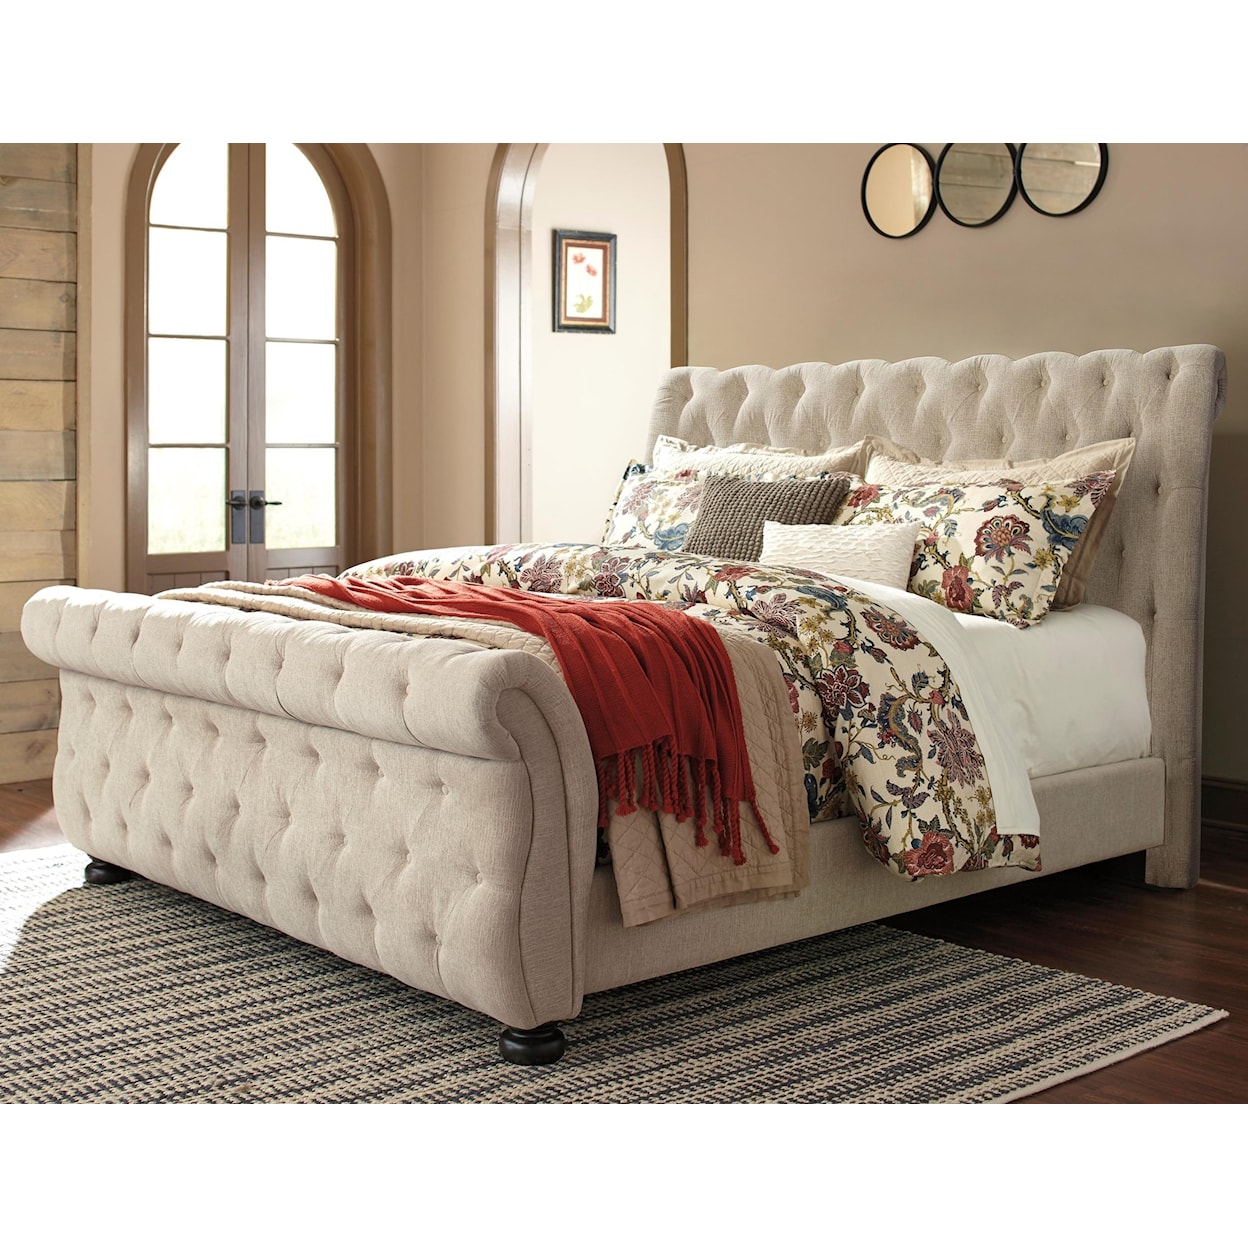 Signature Design by Ashley Willenburg Queen Upholstered Sleigh Bed